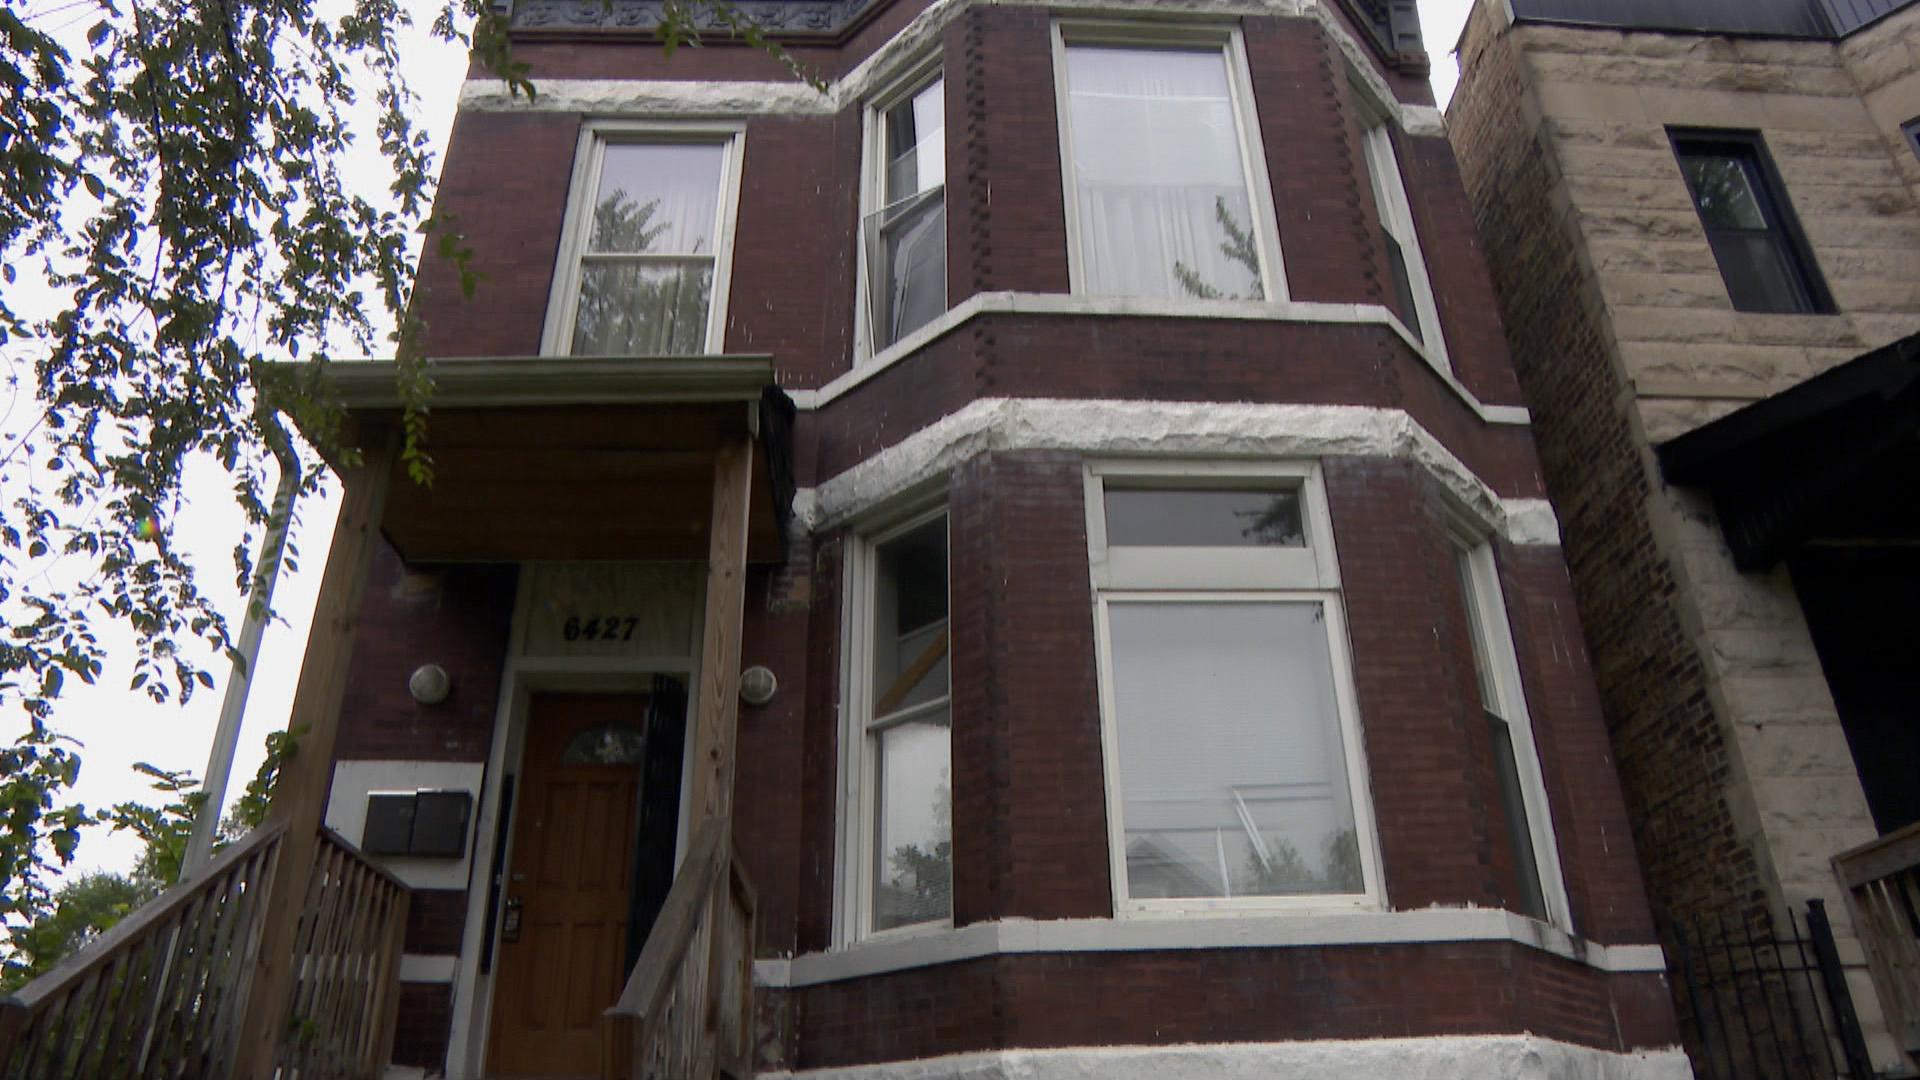 The former home of Emmett Till and his mother, Mamie Till-Mobley, at 6427 S. St. Lawrence Ave. in Chicago’s Woodlawn community. (WTTW News)